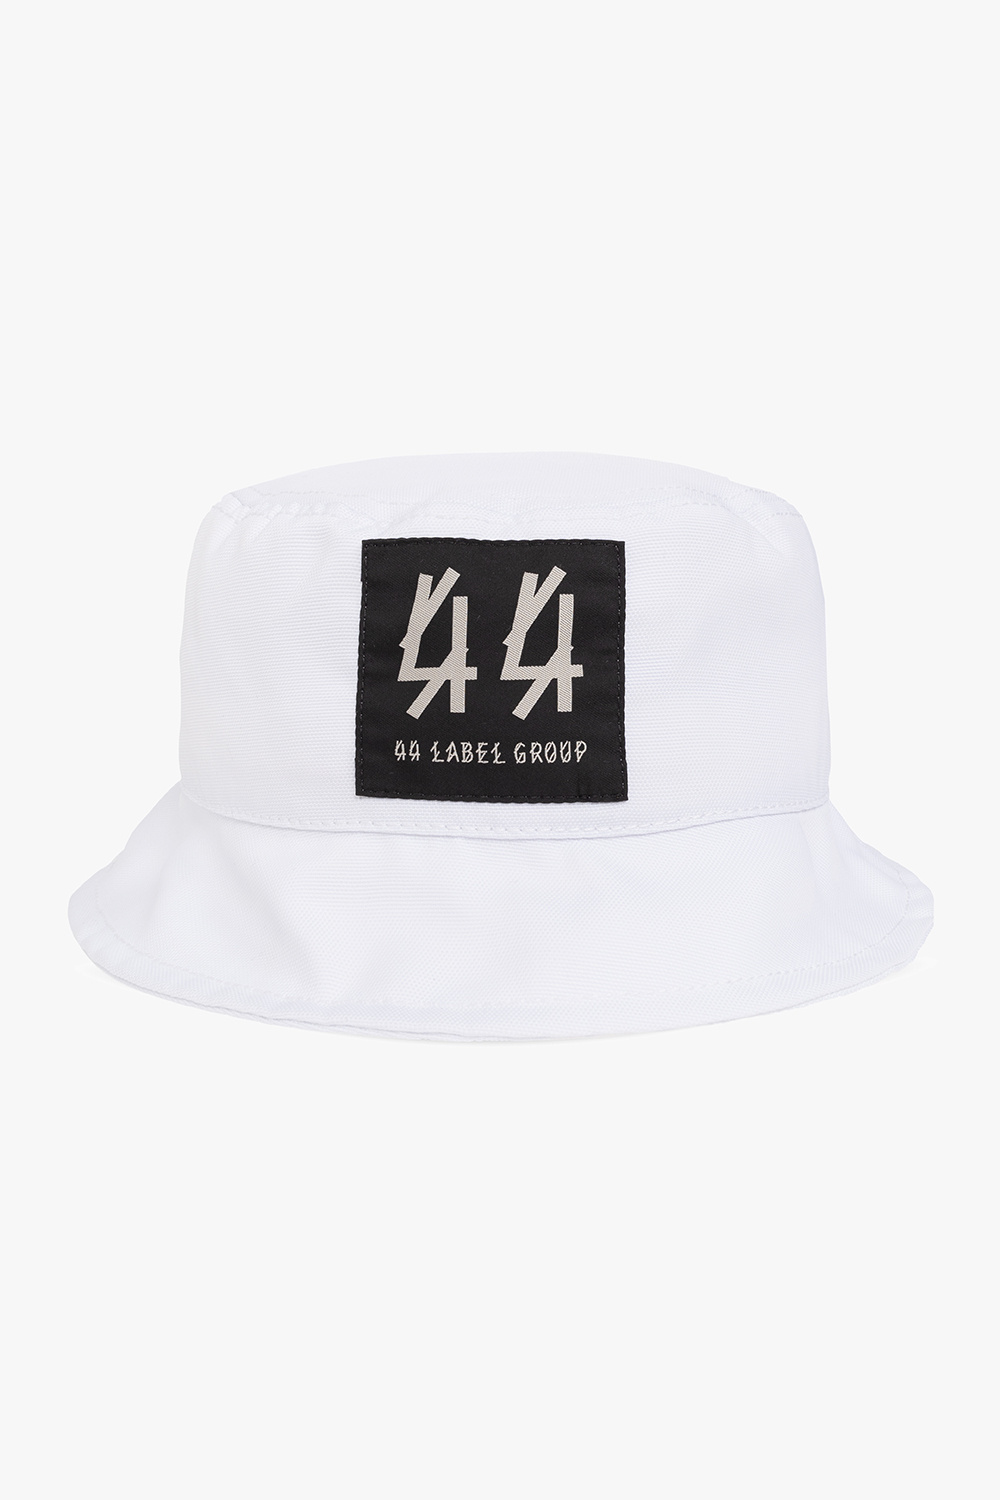 44 Label Group Fisherman hat with logo